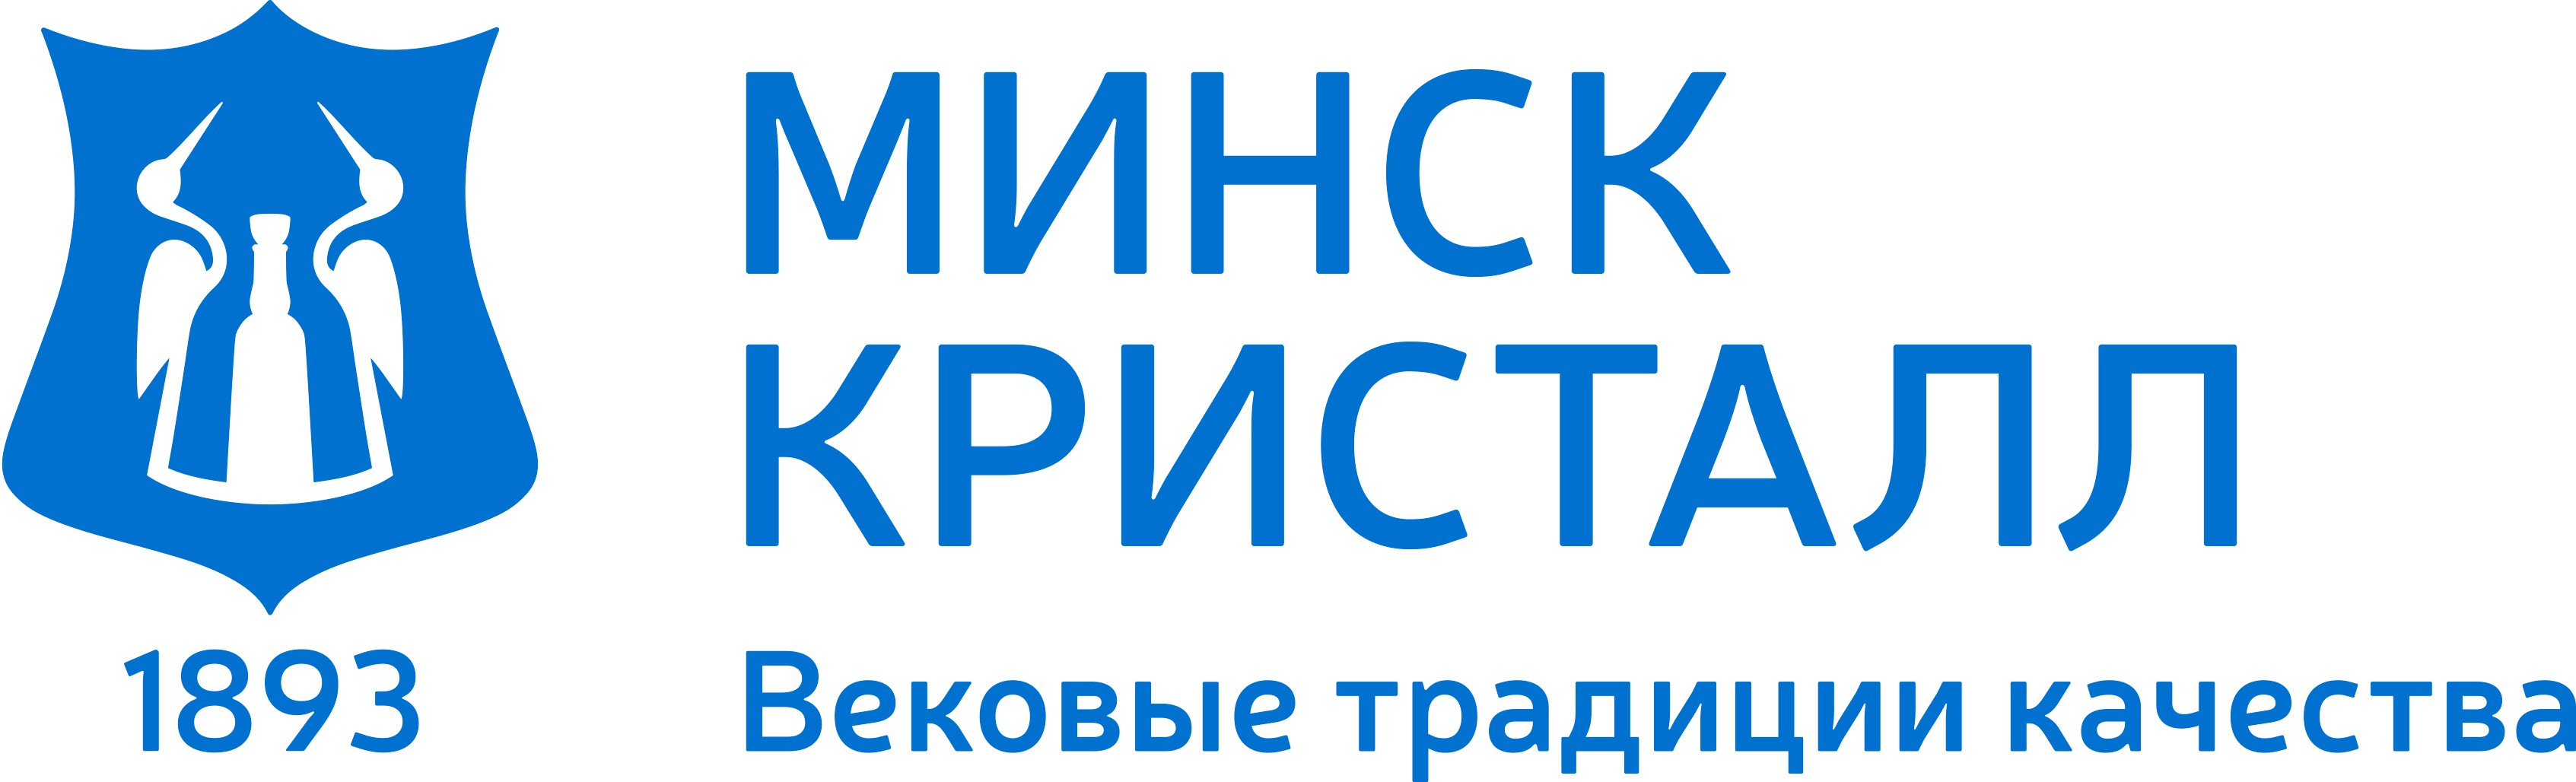 Минск Кристалл